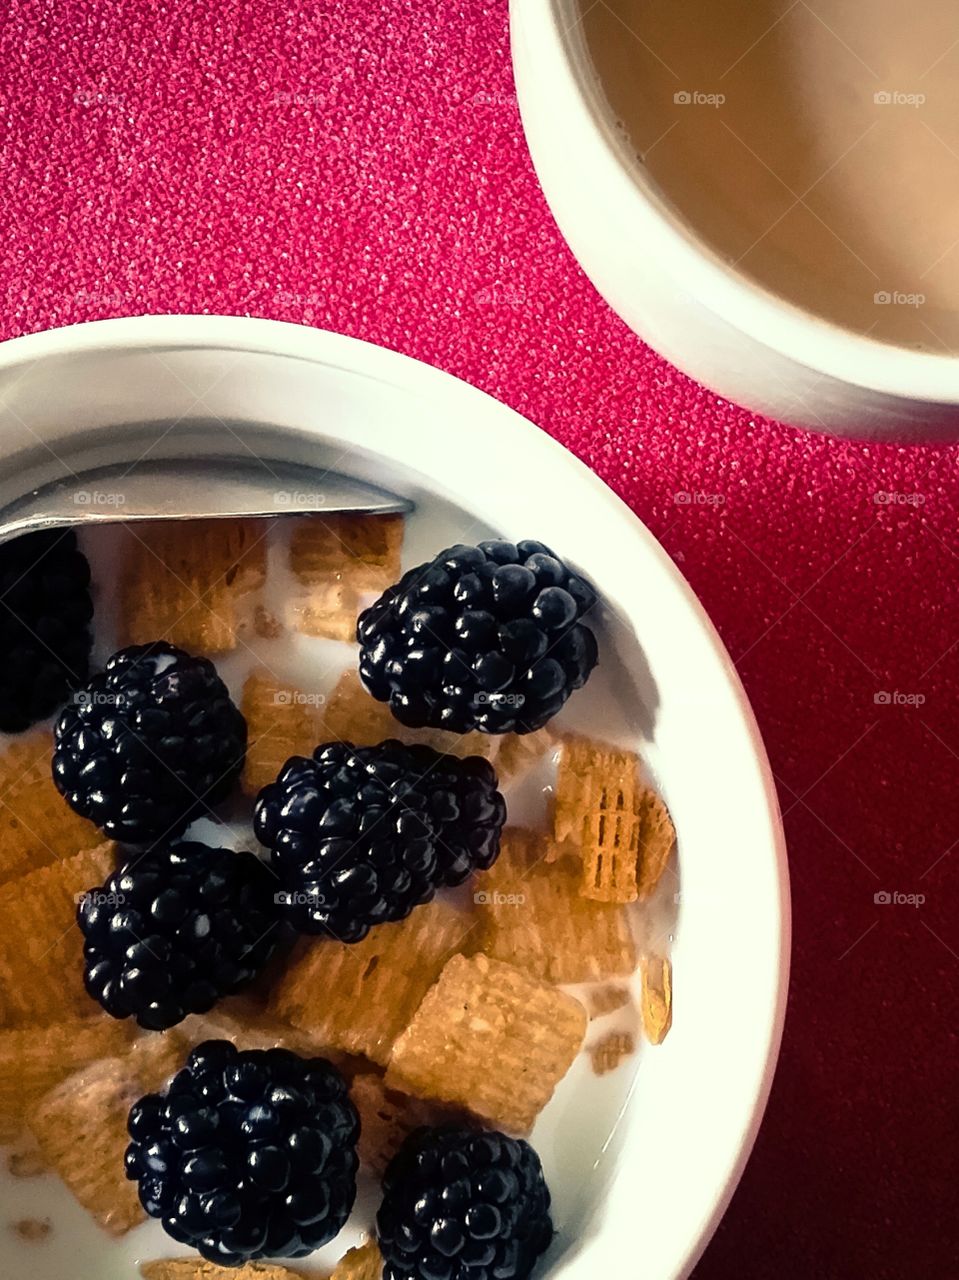 Blackberries on cereal with coffee